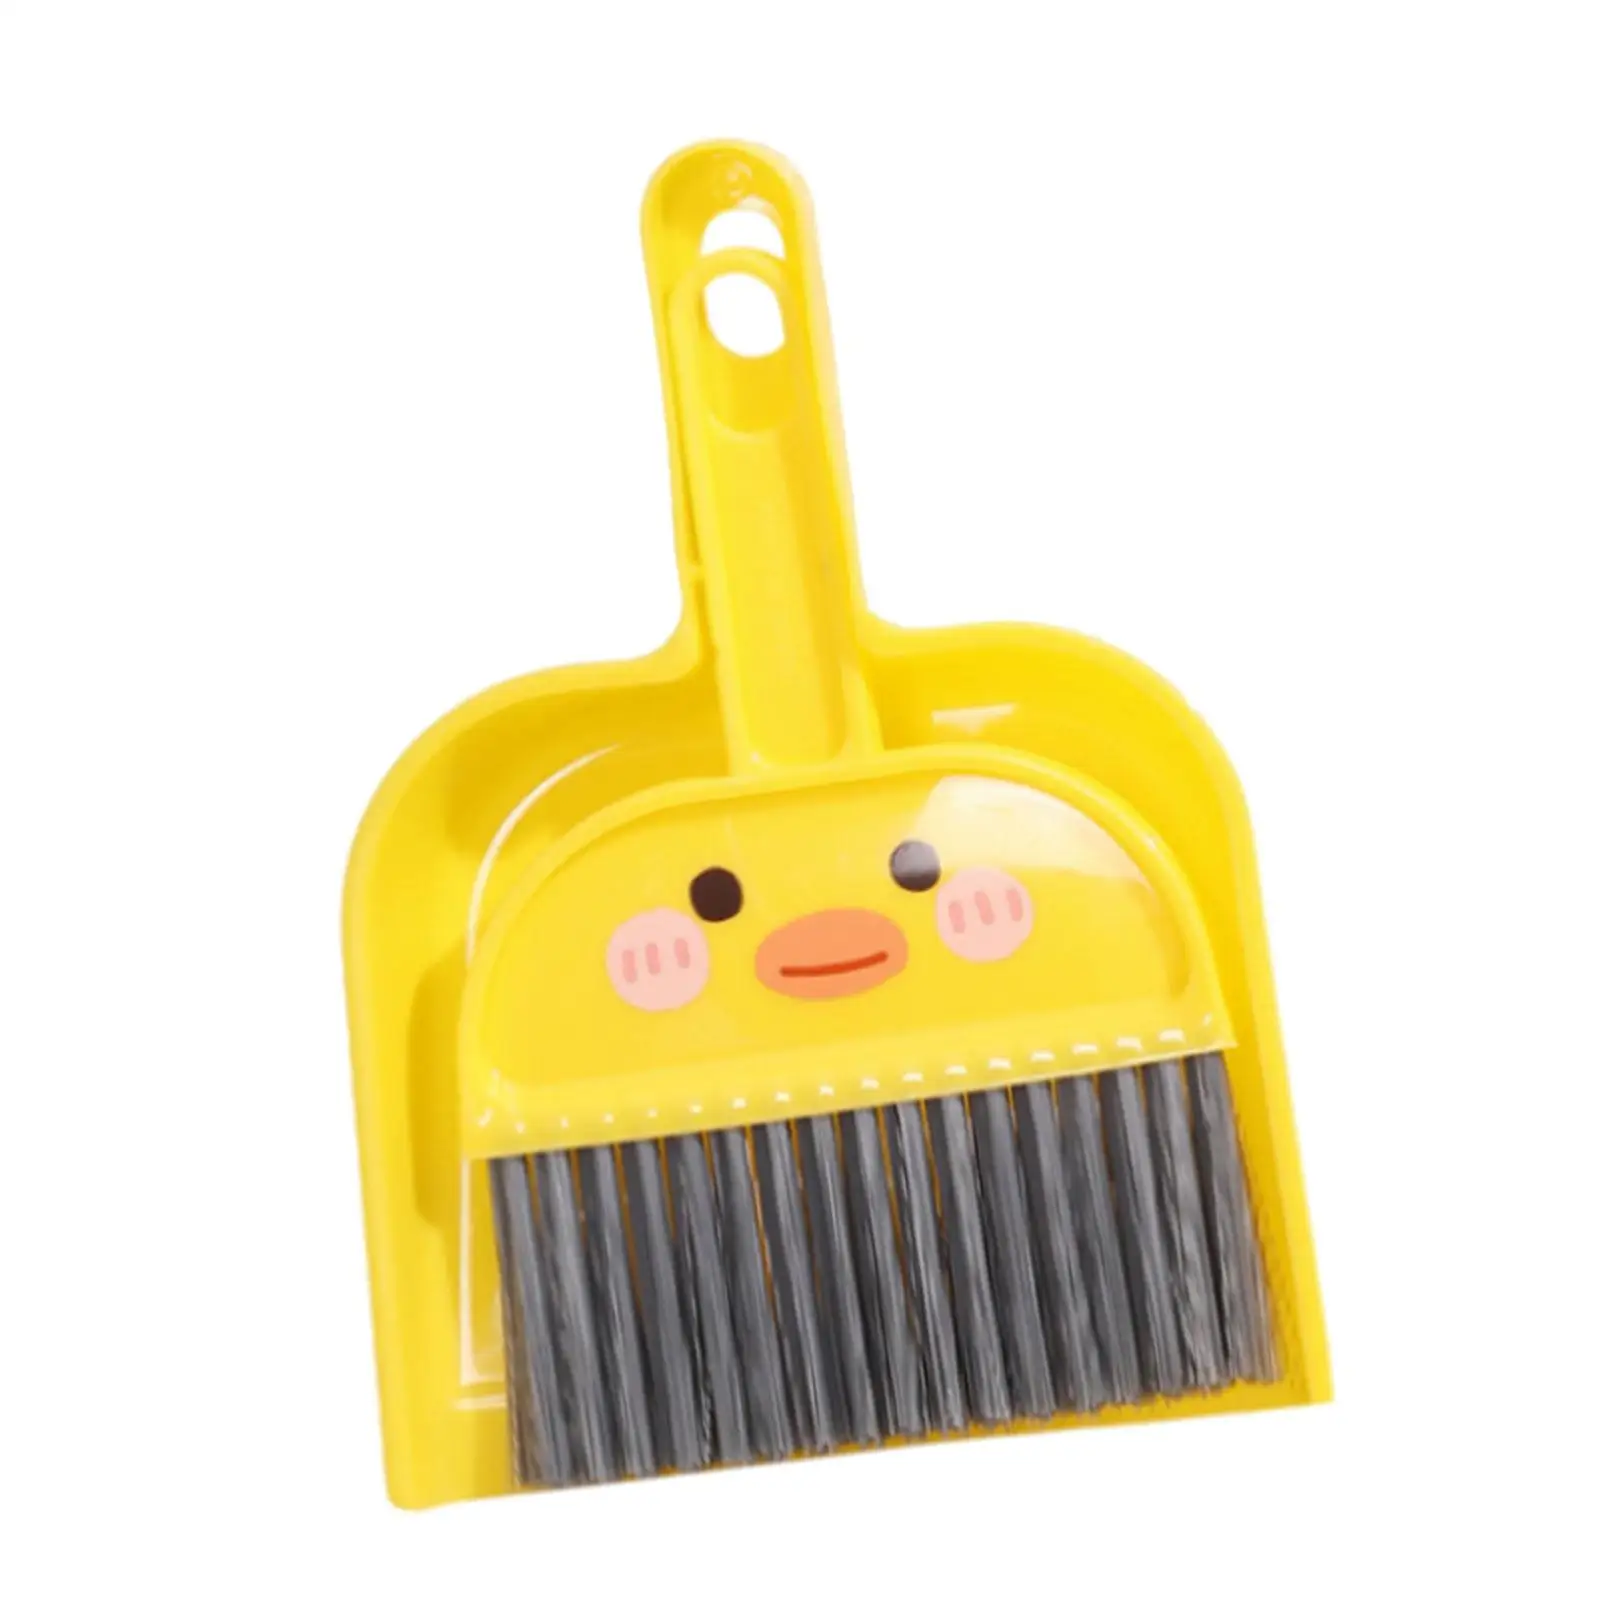 Small Dustpan and Broom Set Pretend Play Collect Dust Pan Cleaning Tool Housekeeping for Desk Seat Keyboard Carpets Sofa